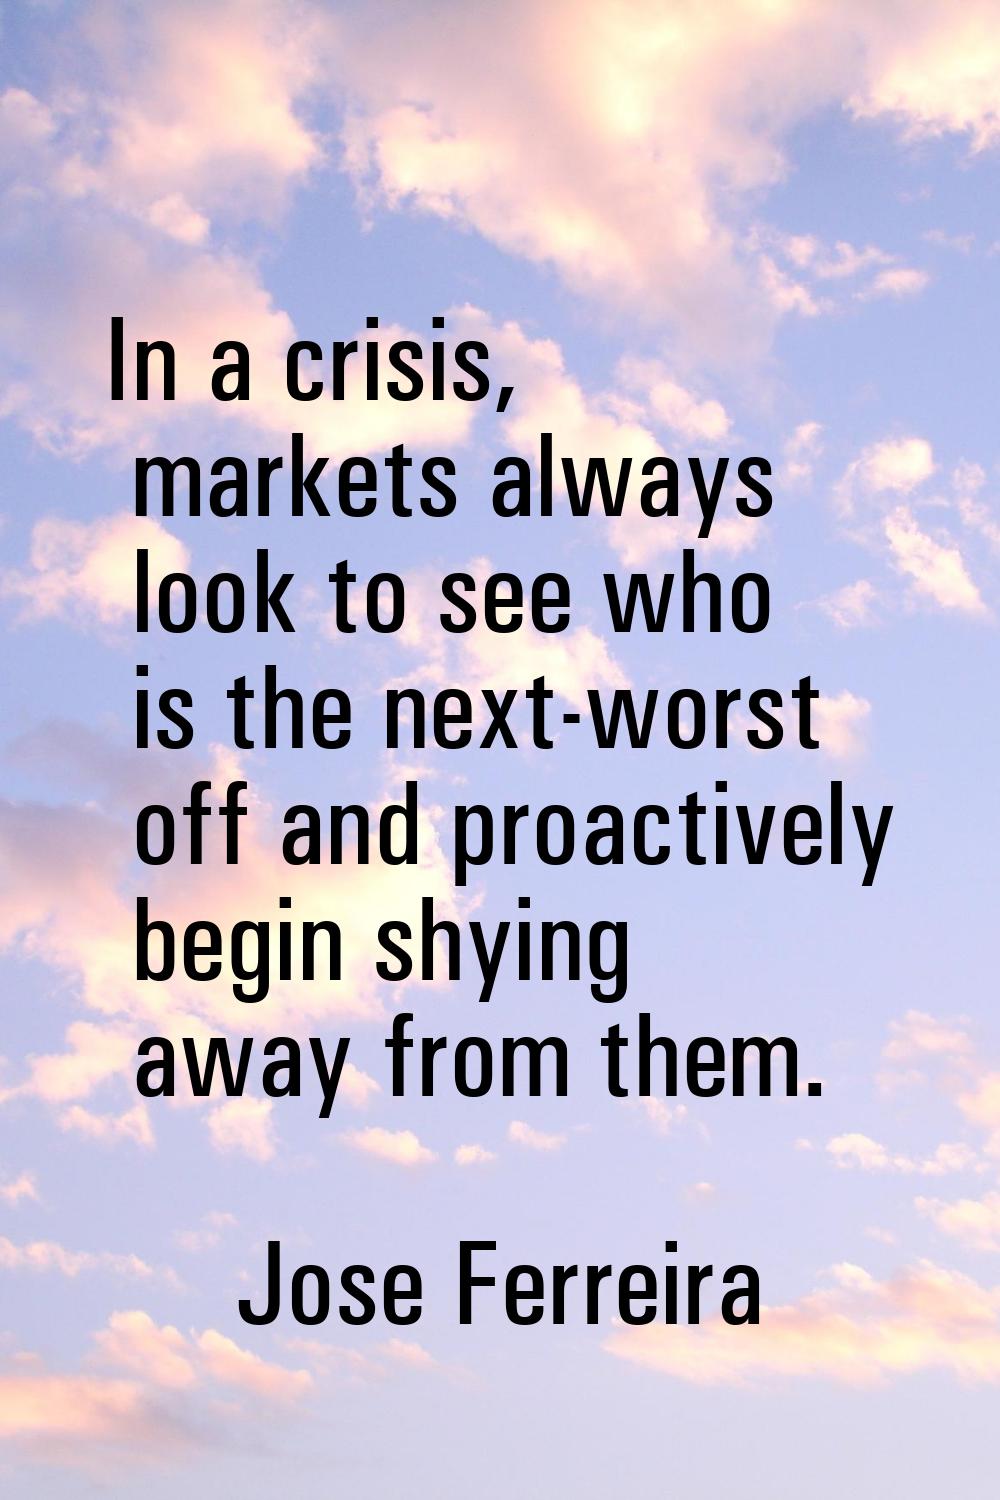 In a crisis, markets always look to see who is the next-worst off and proactively begin shying away